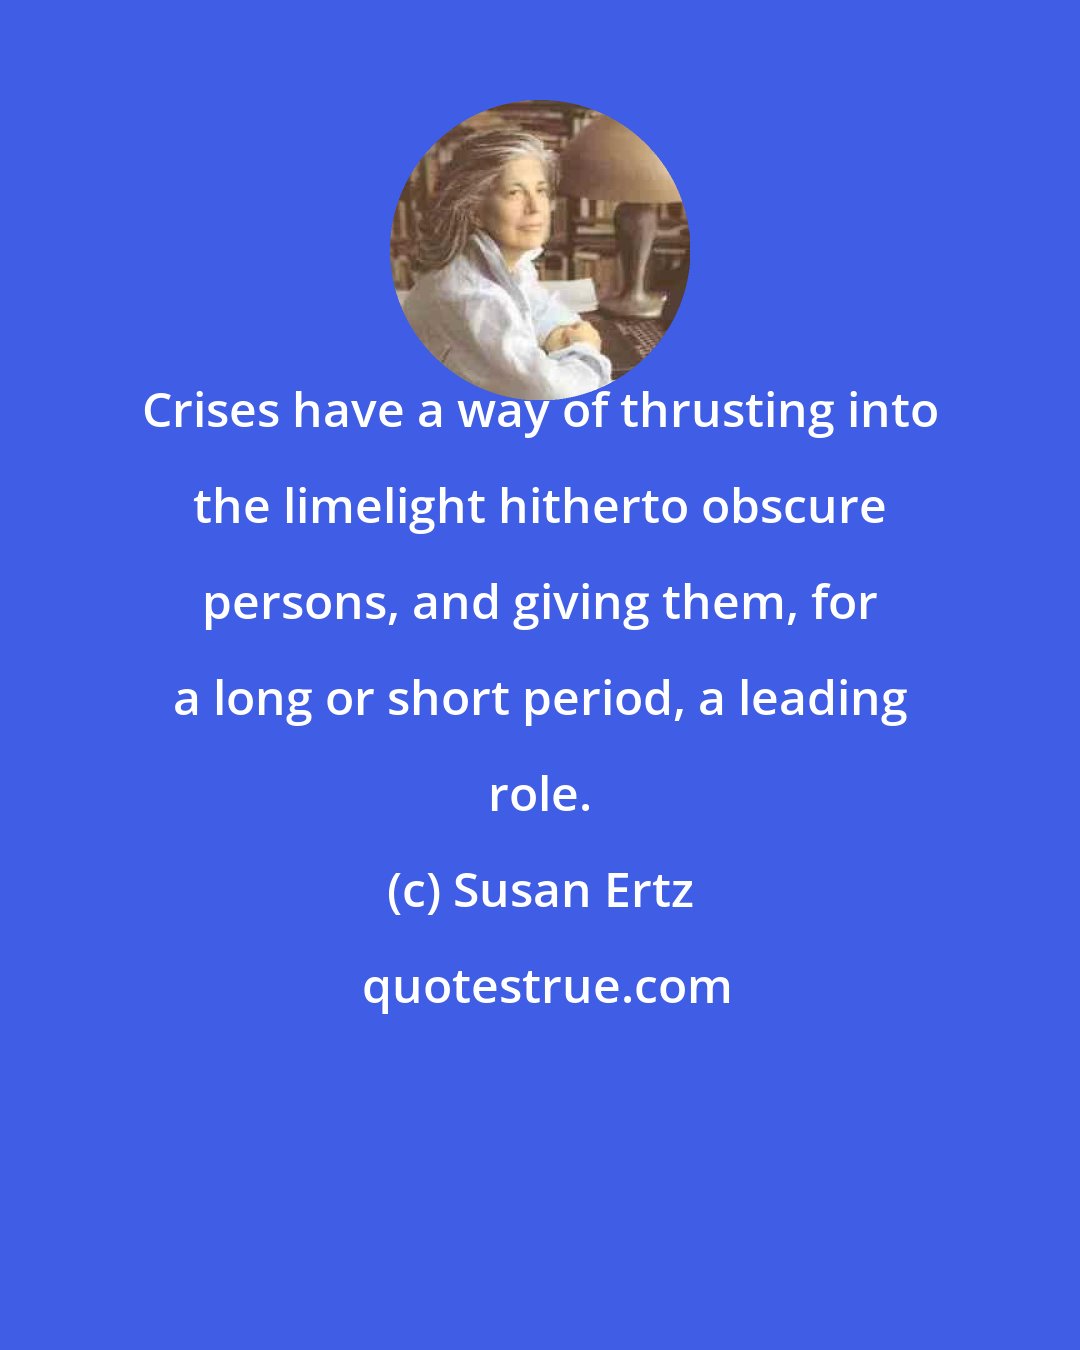 Susan Ertz: Crises have a way of thrusting into the limelight hitherto obscure persons, and giving them, for a long or short period, a leading role.